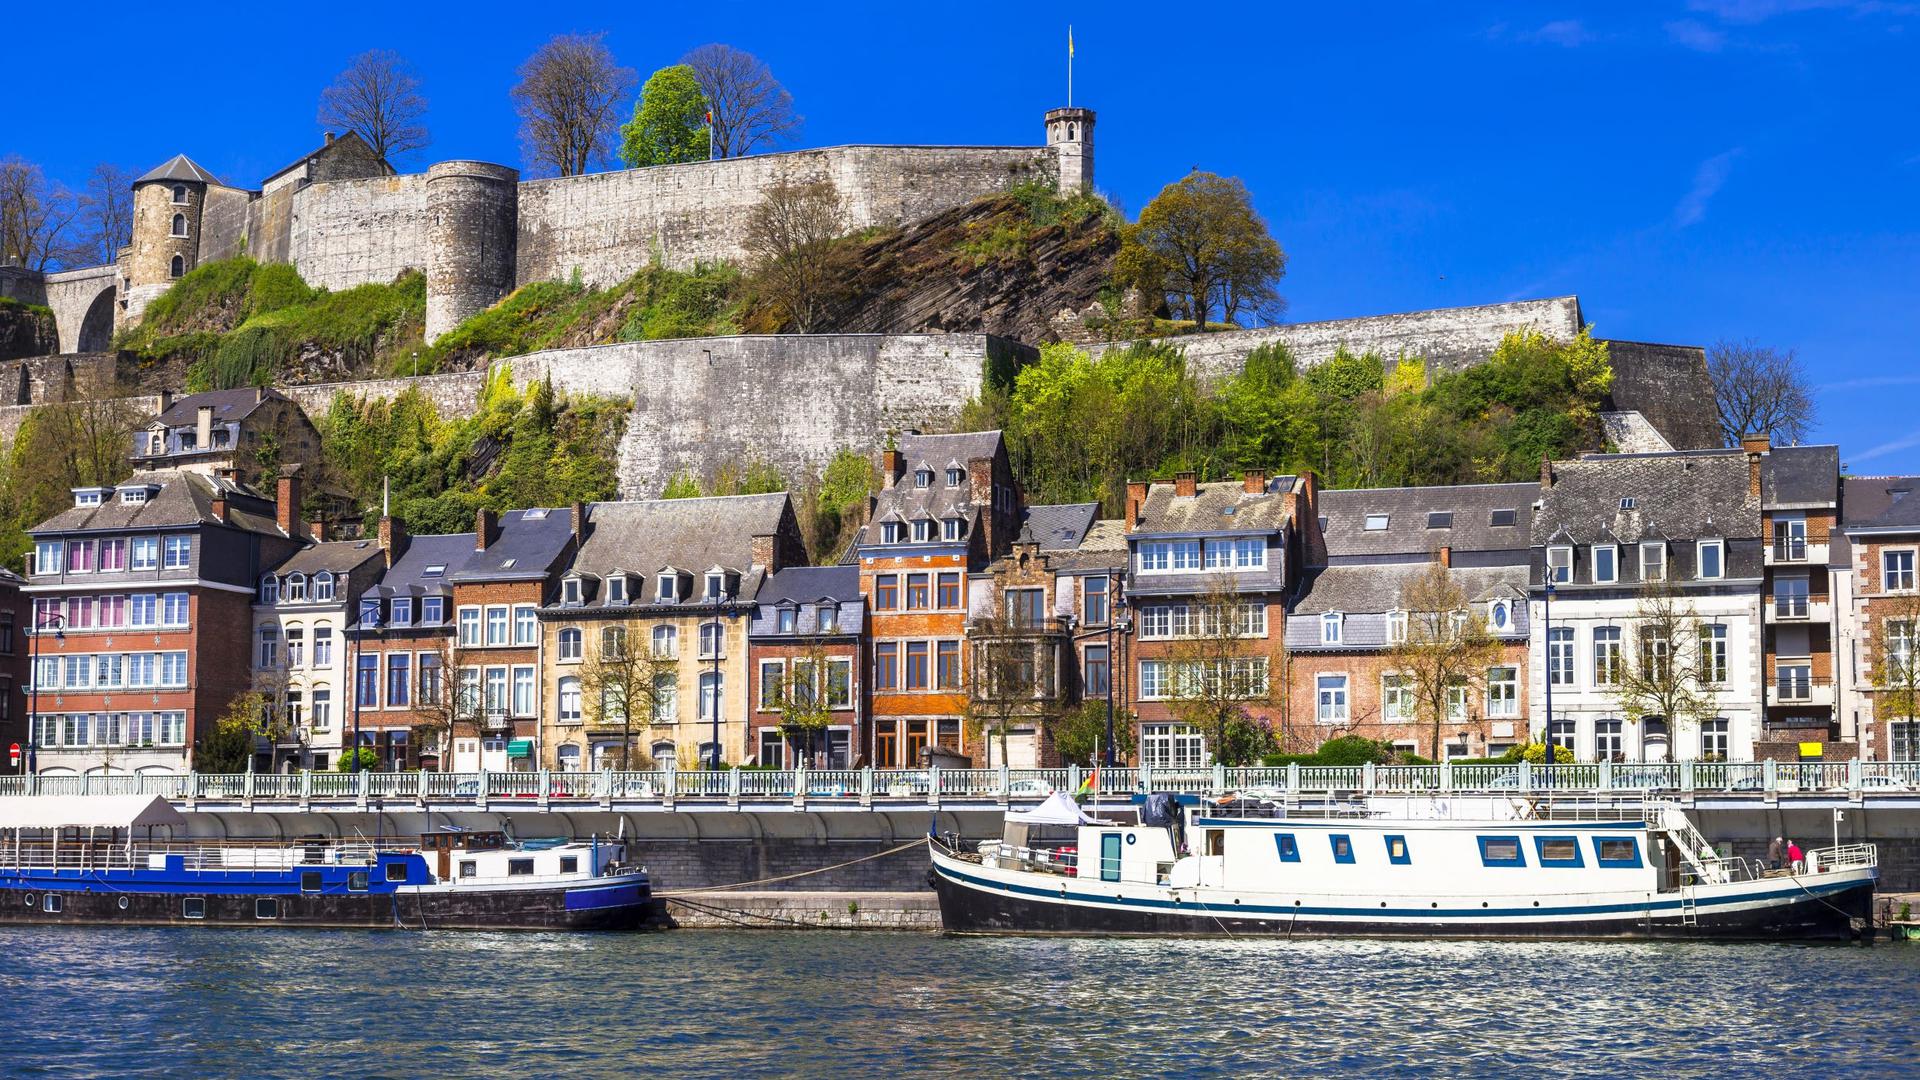 With a keep from the Middle Ages, fortified by Vauban and named a termite mound by Napoleon, Namur's Citadel overlooks the city